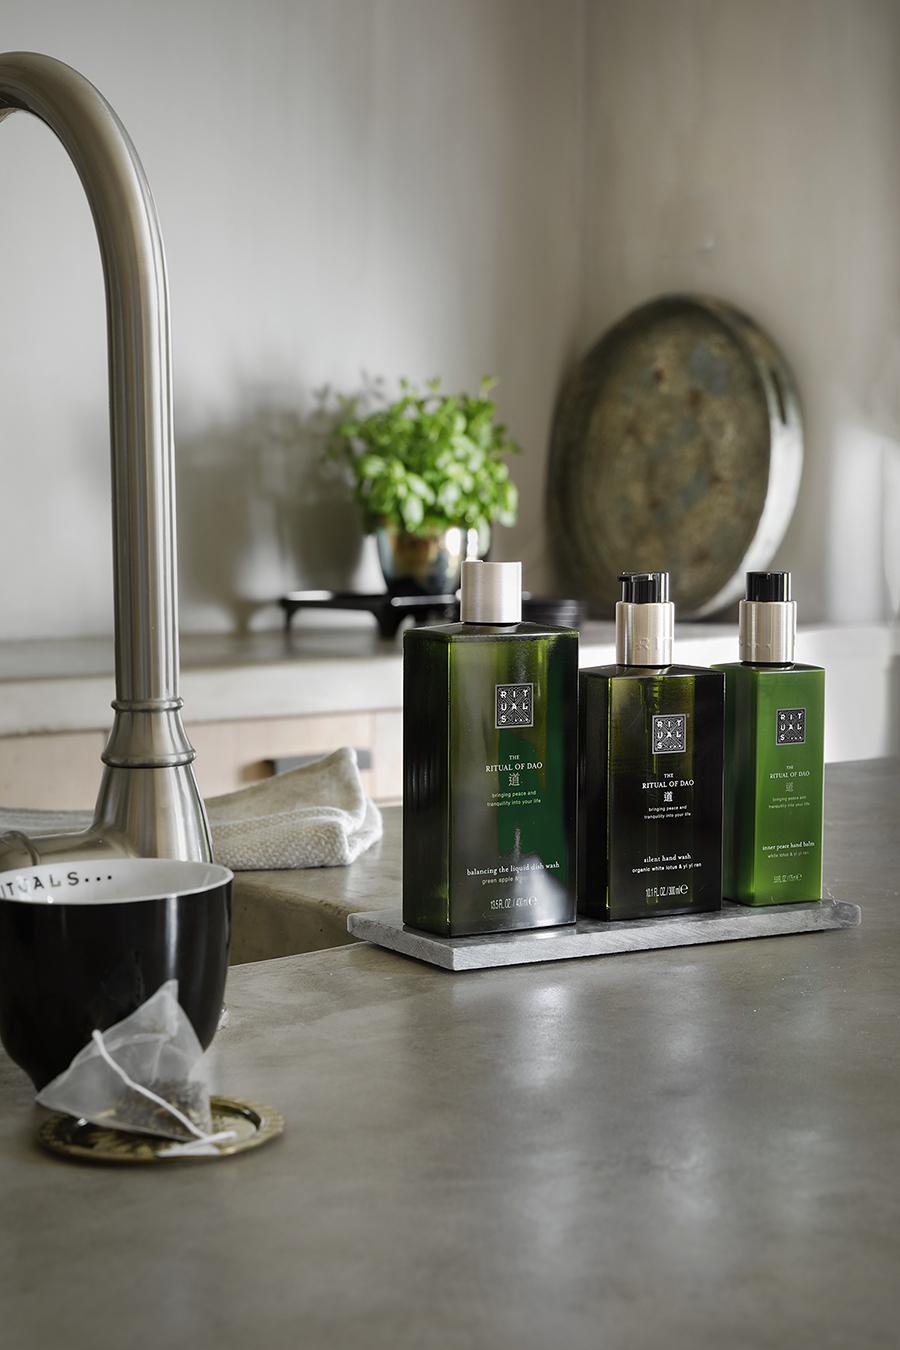 At Home with Rituals Innovation & Sustainability Director, Niki Schilling